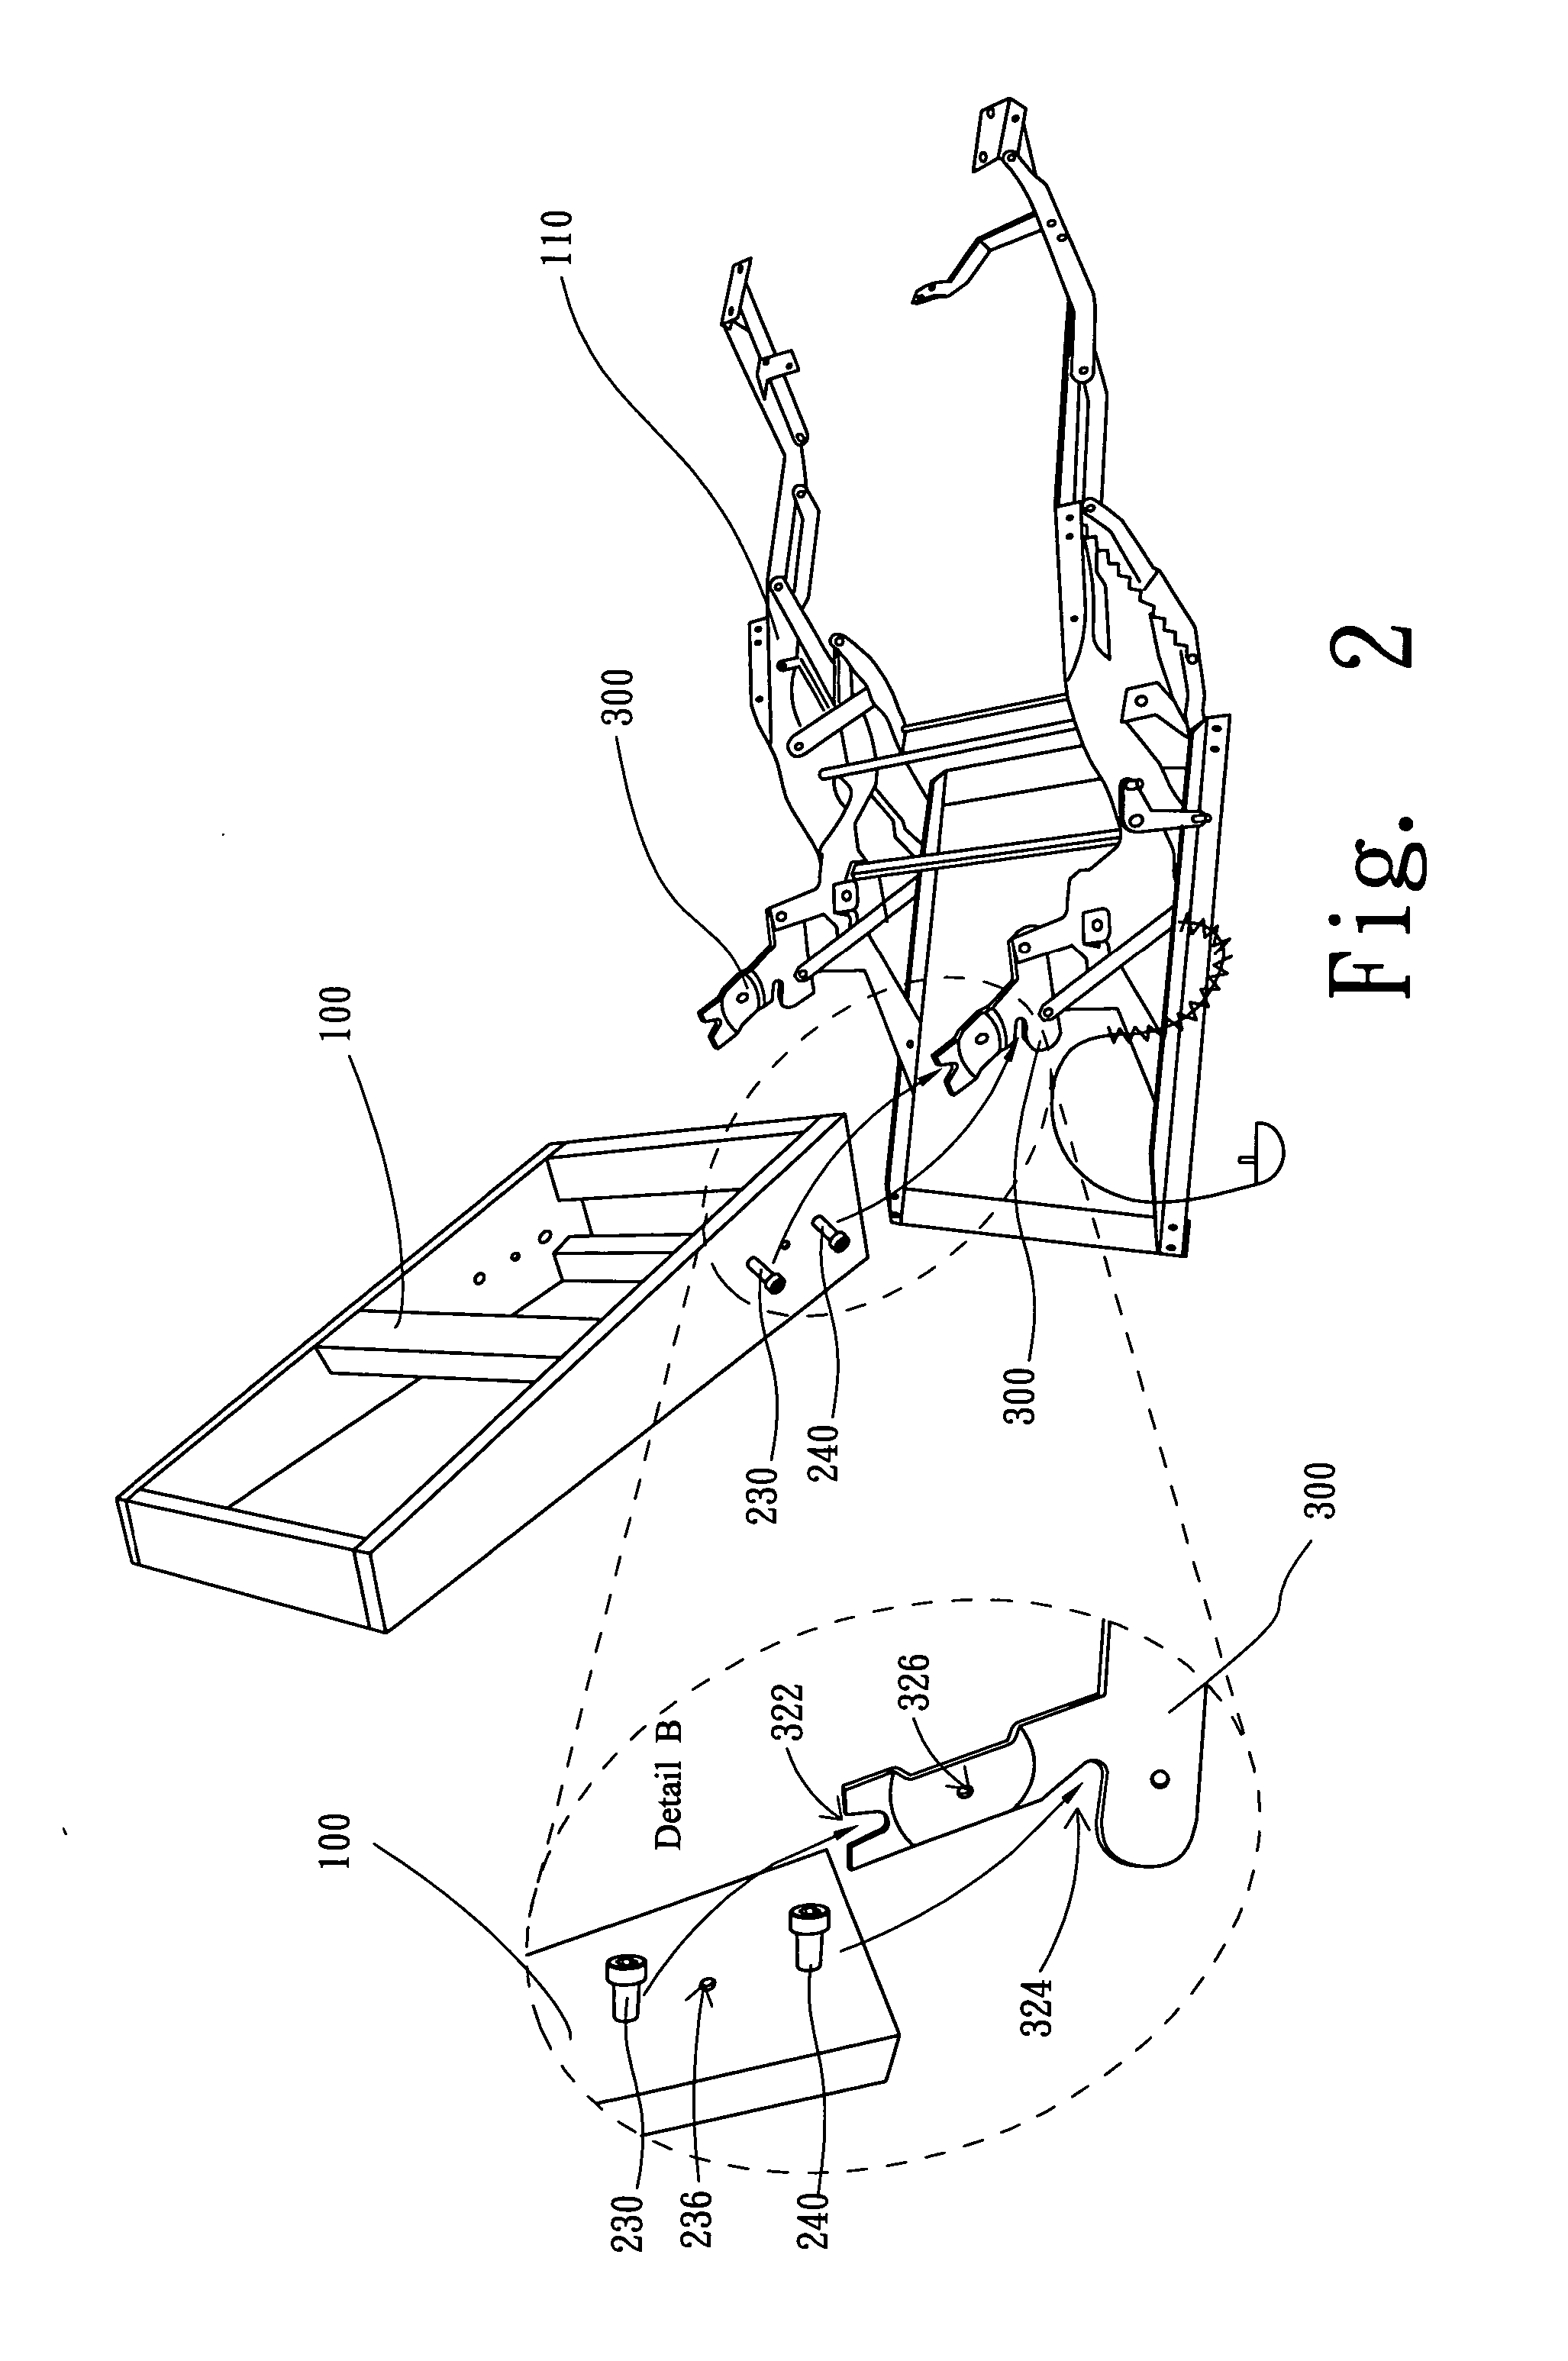 Structure connection of motion chair